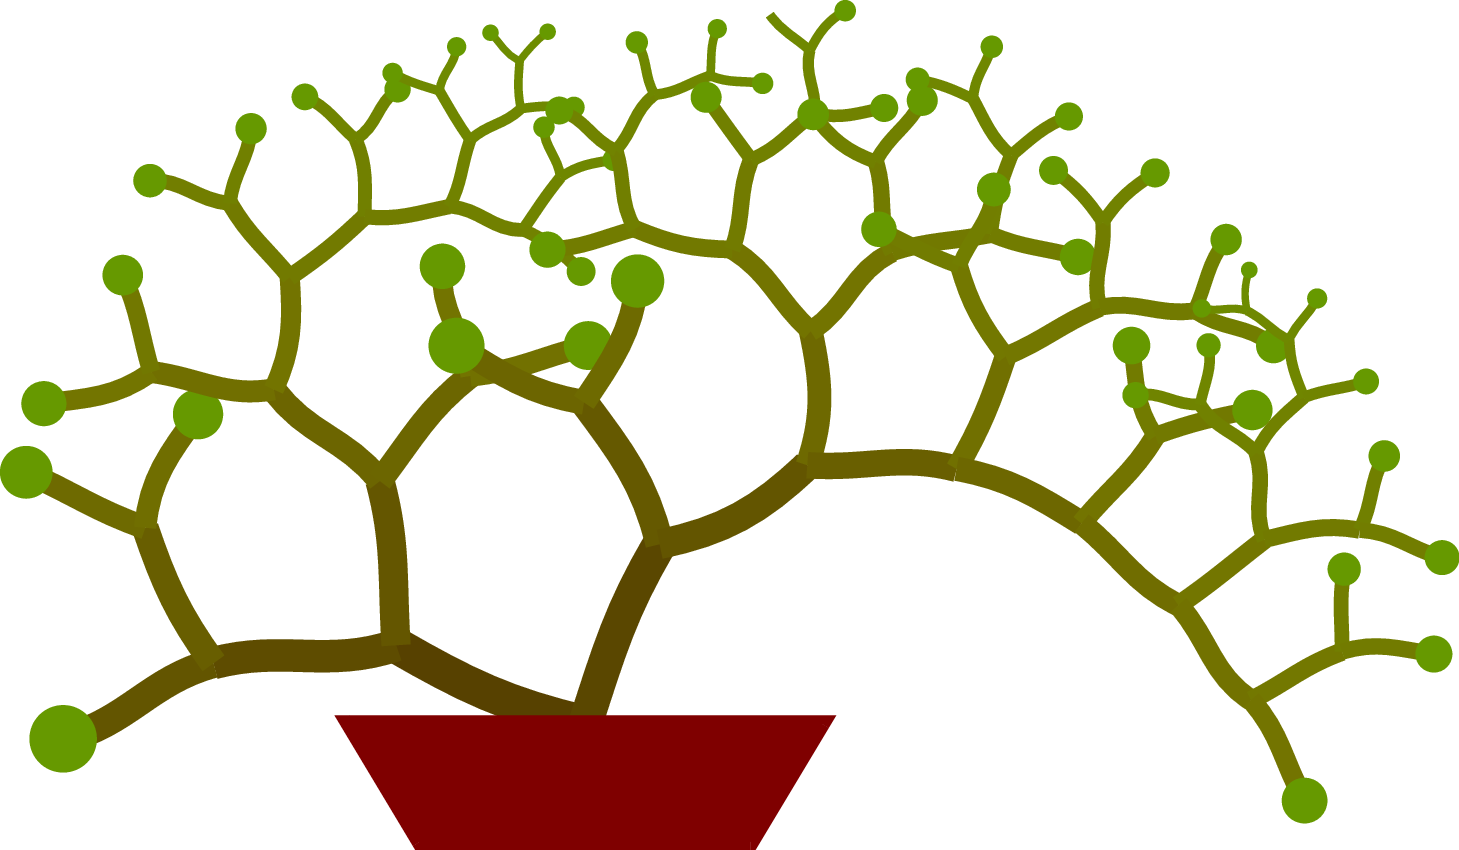 A binary tree that is somewhat irregular